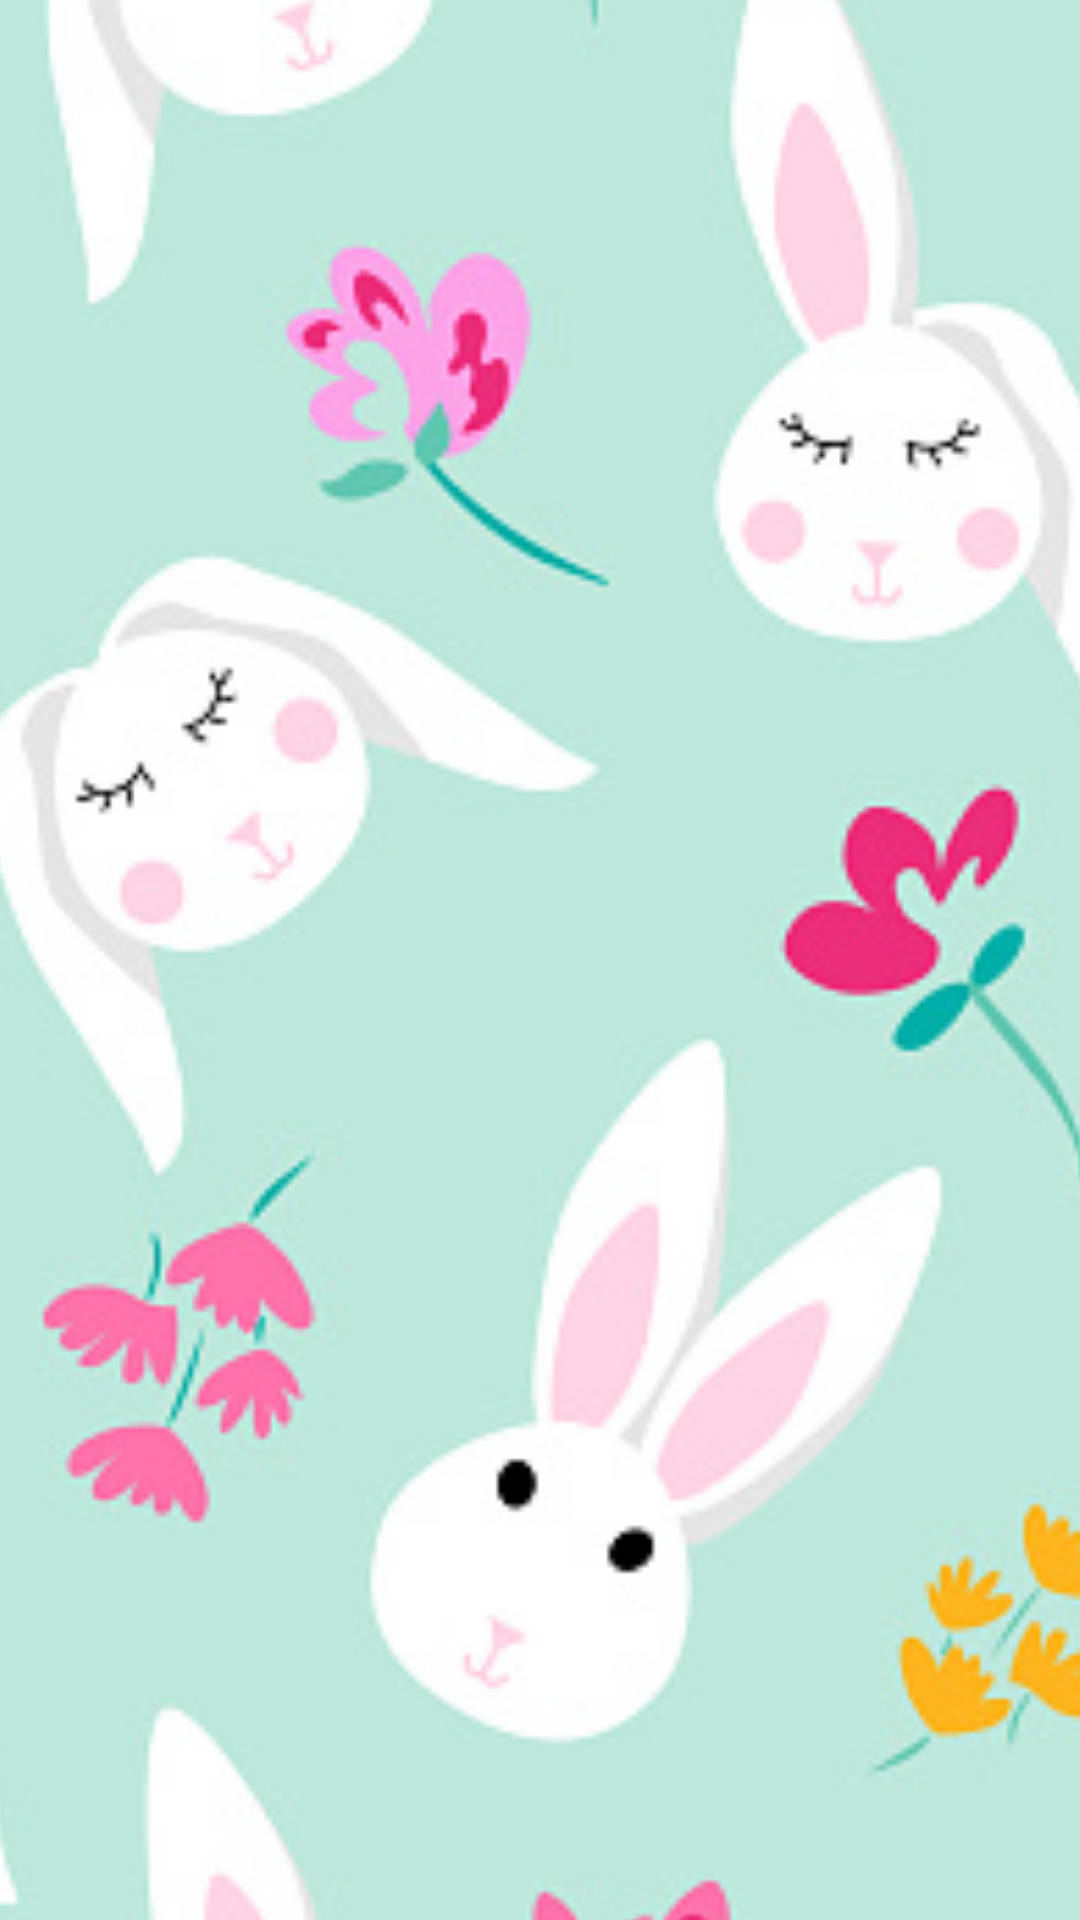 Flowers And White Rabbits Background